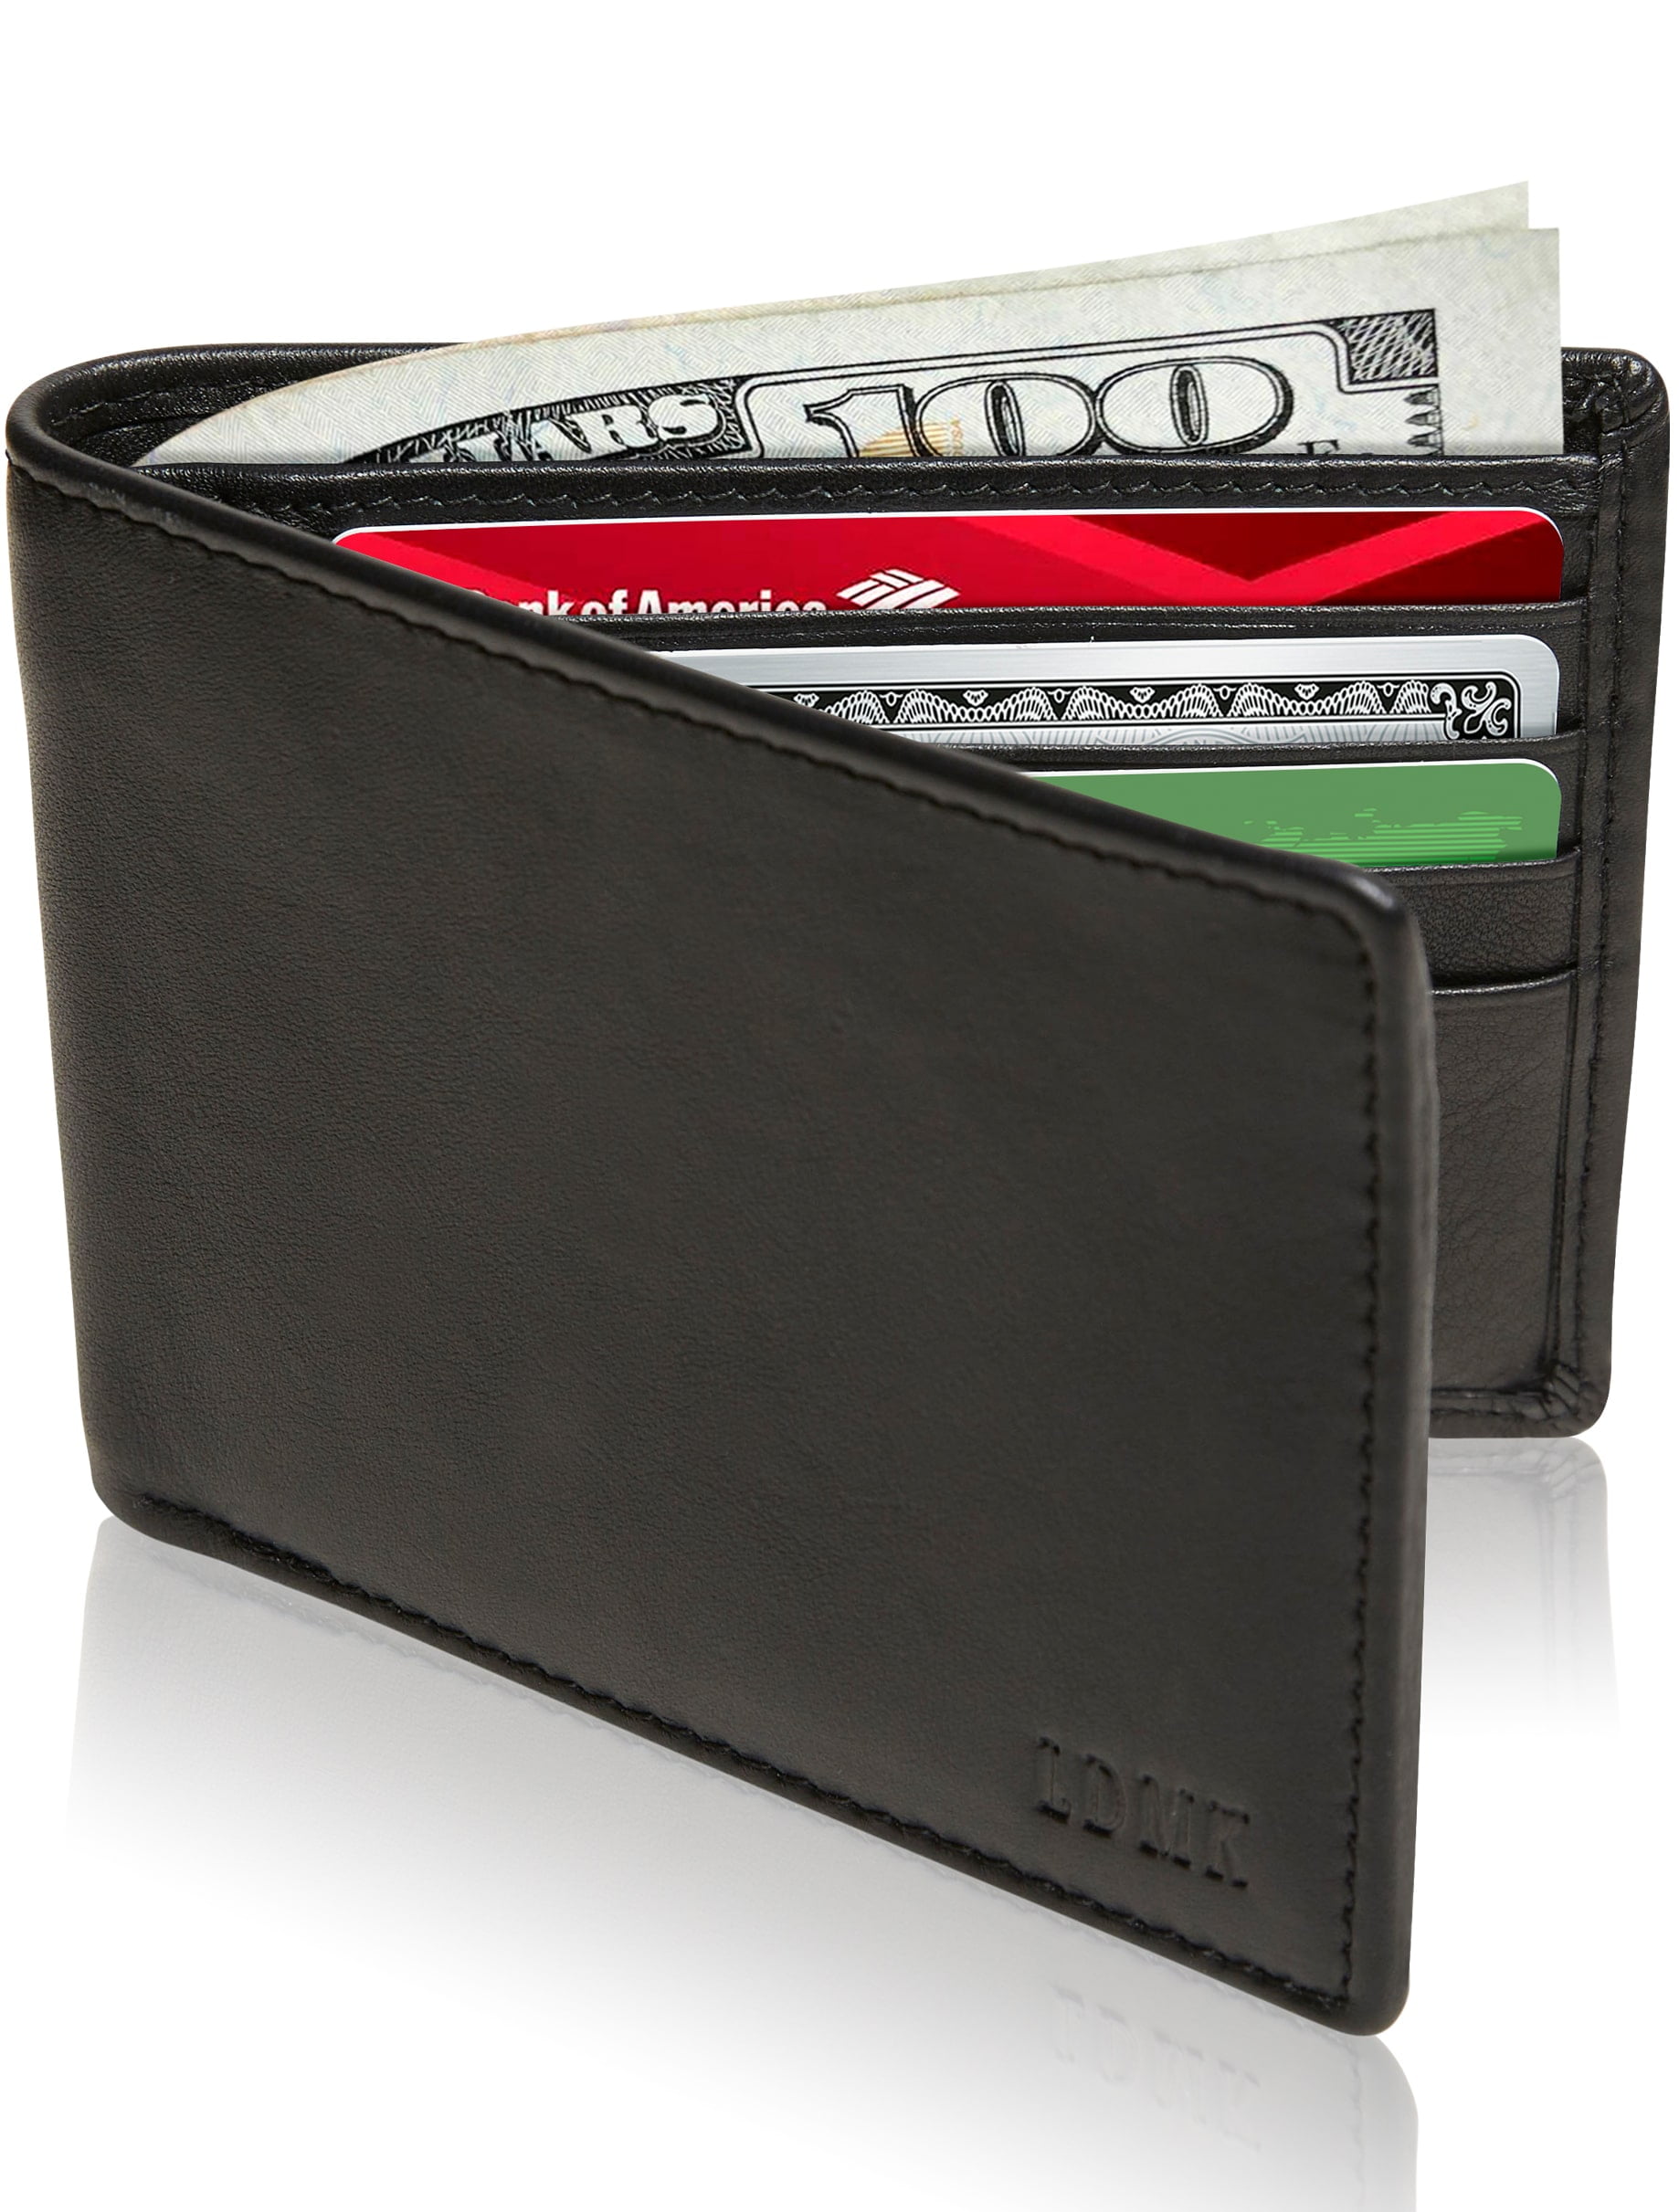 Leather wallet with removable flip up ID window bifold durable security billfolds for men premium men’s RFID blocking wallets with 8 credit card slots